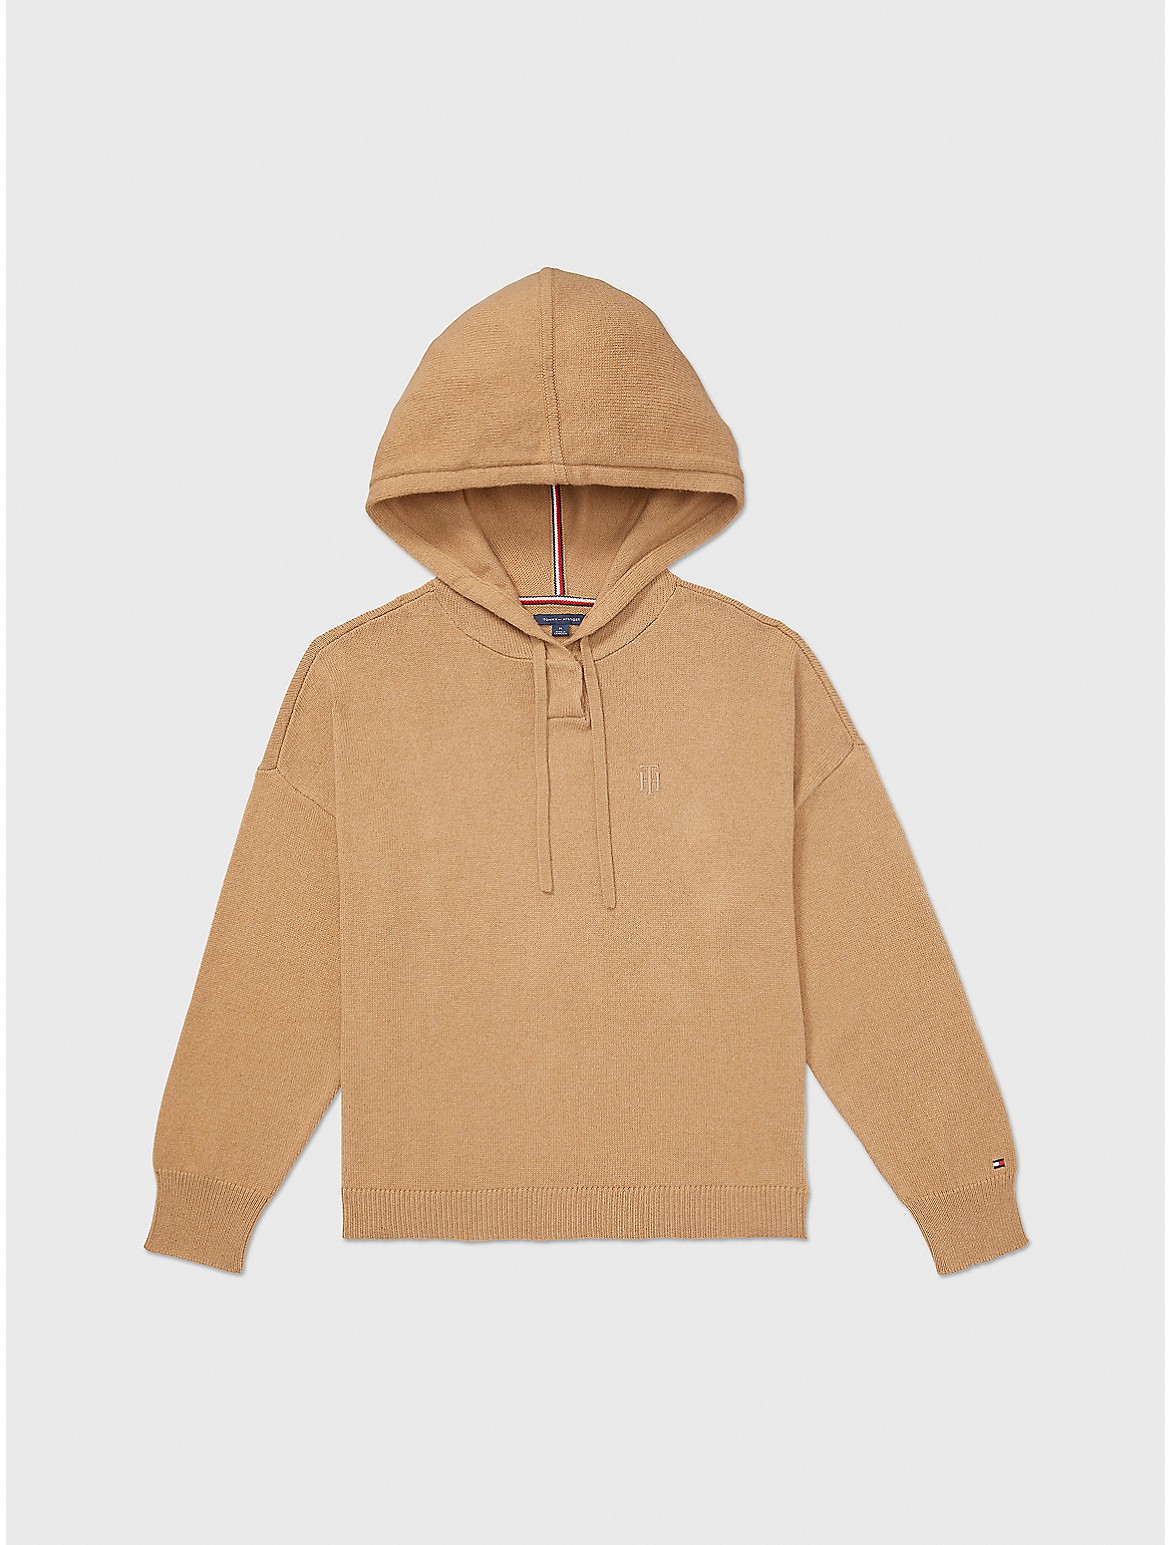 Tommy Hilfiger Hoodie Sweater In Pinecone Tan